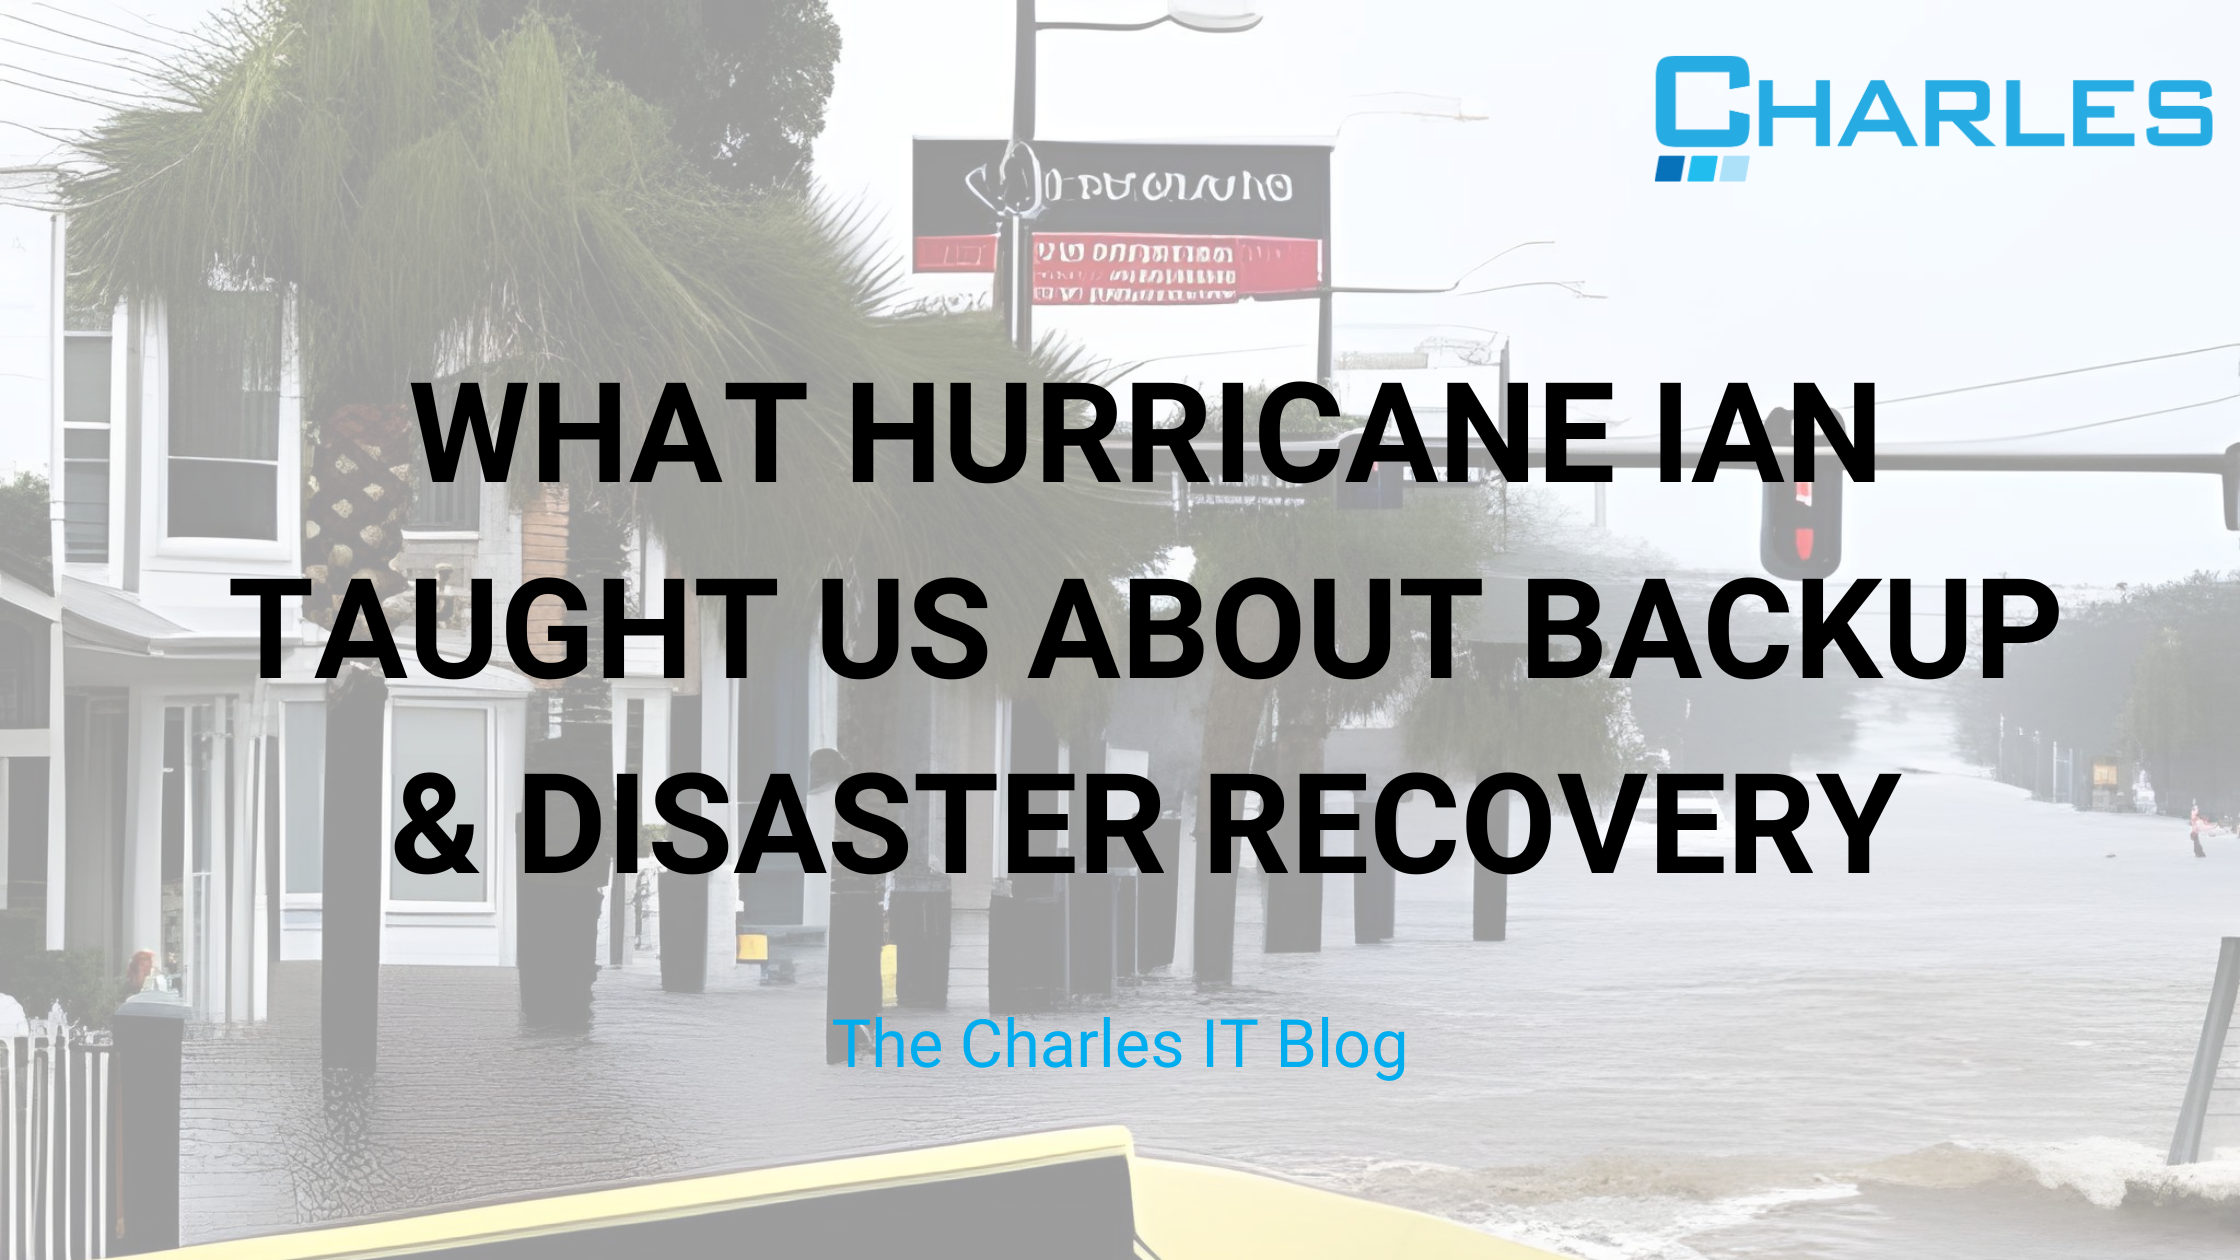 What Hurricane Ian Taught us About Backup & Disaster Recovery